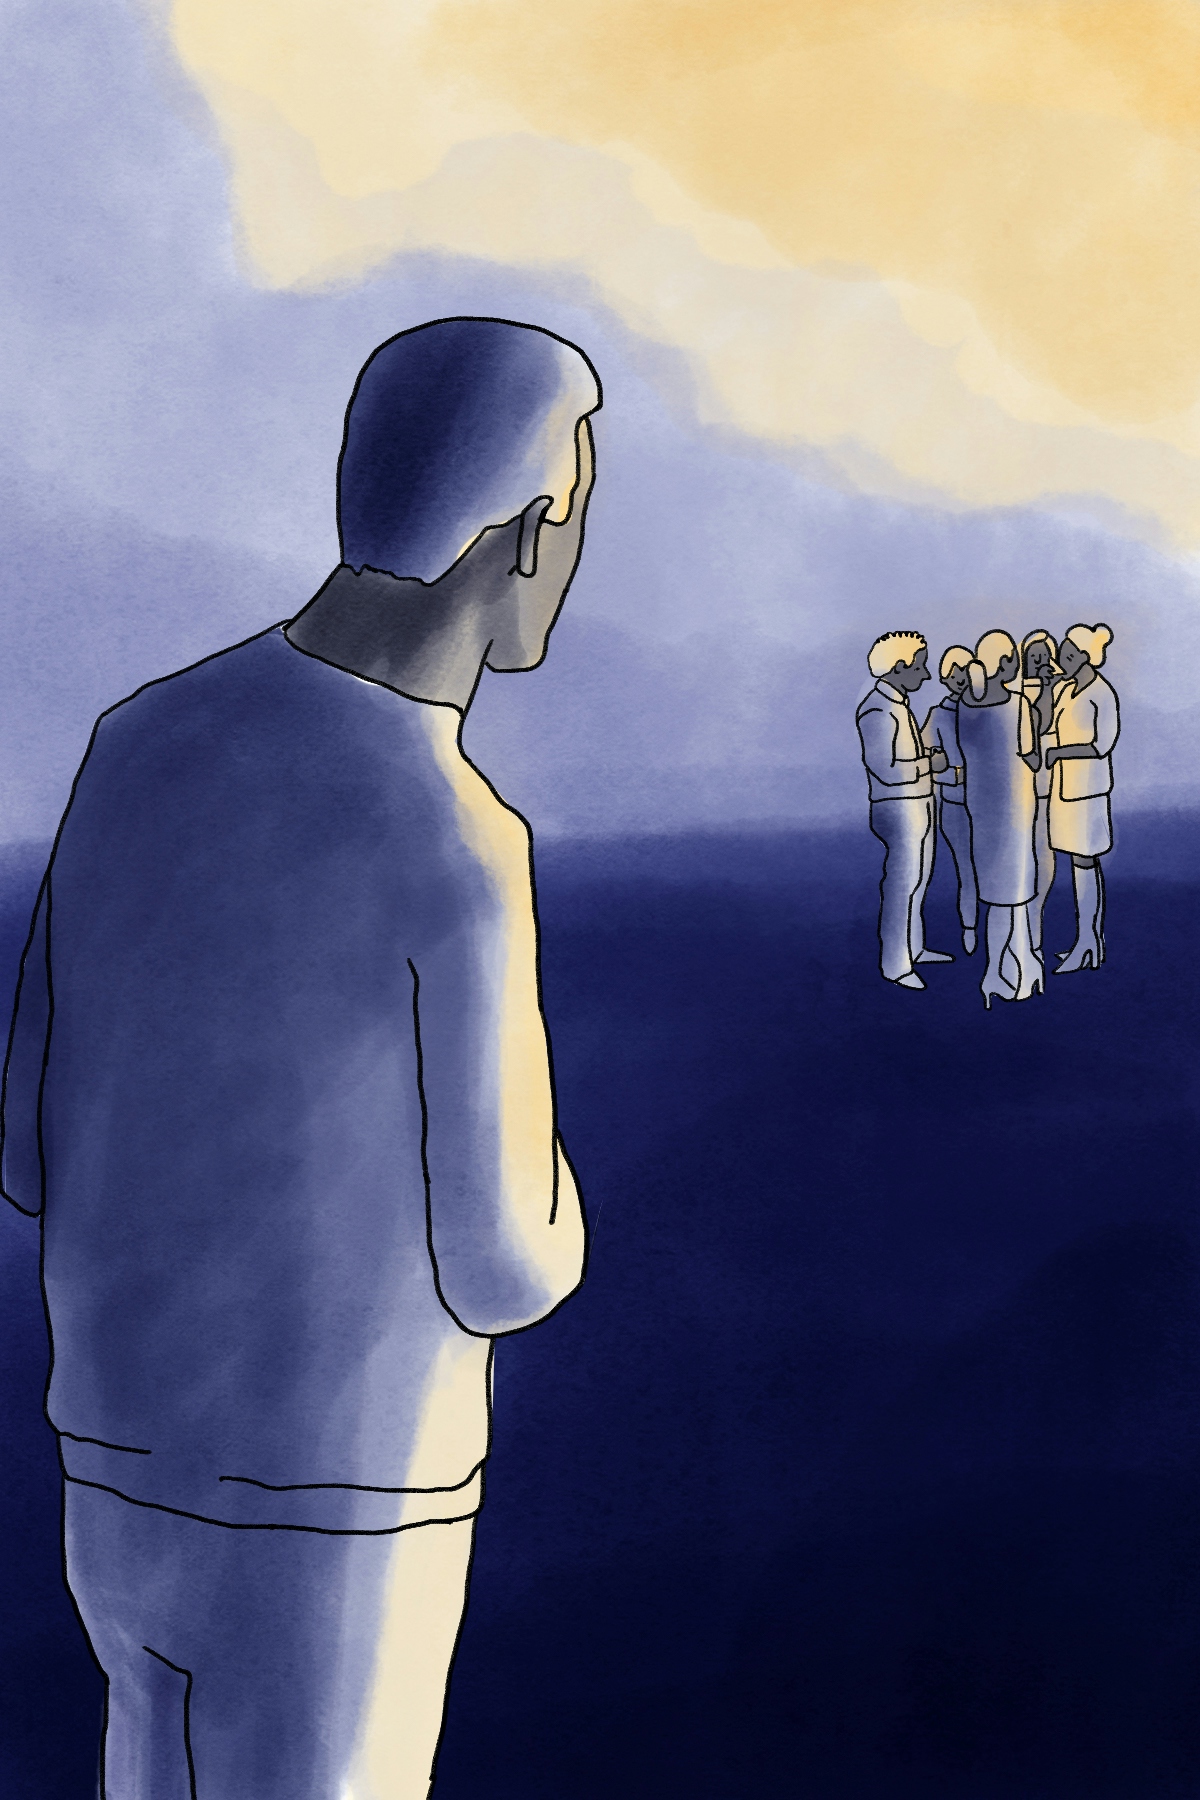 Illustration of a person standing in the foreground who appears reluctant to join a group of five other people in the distance.